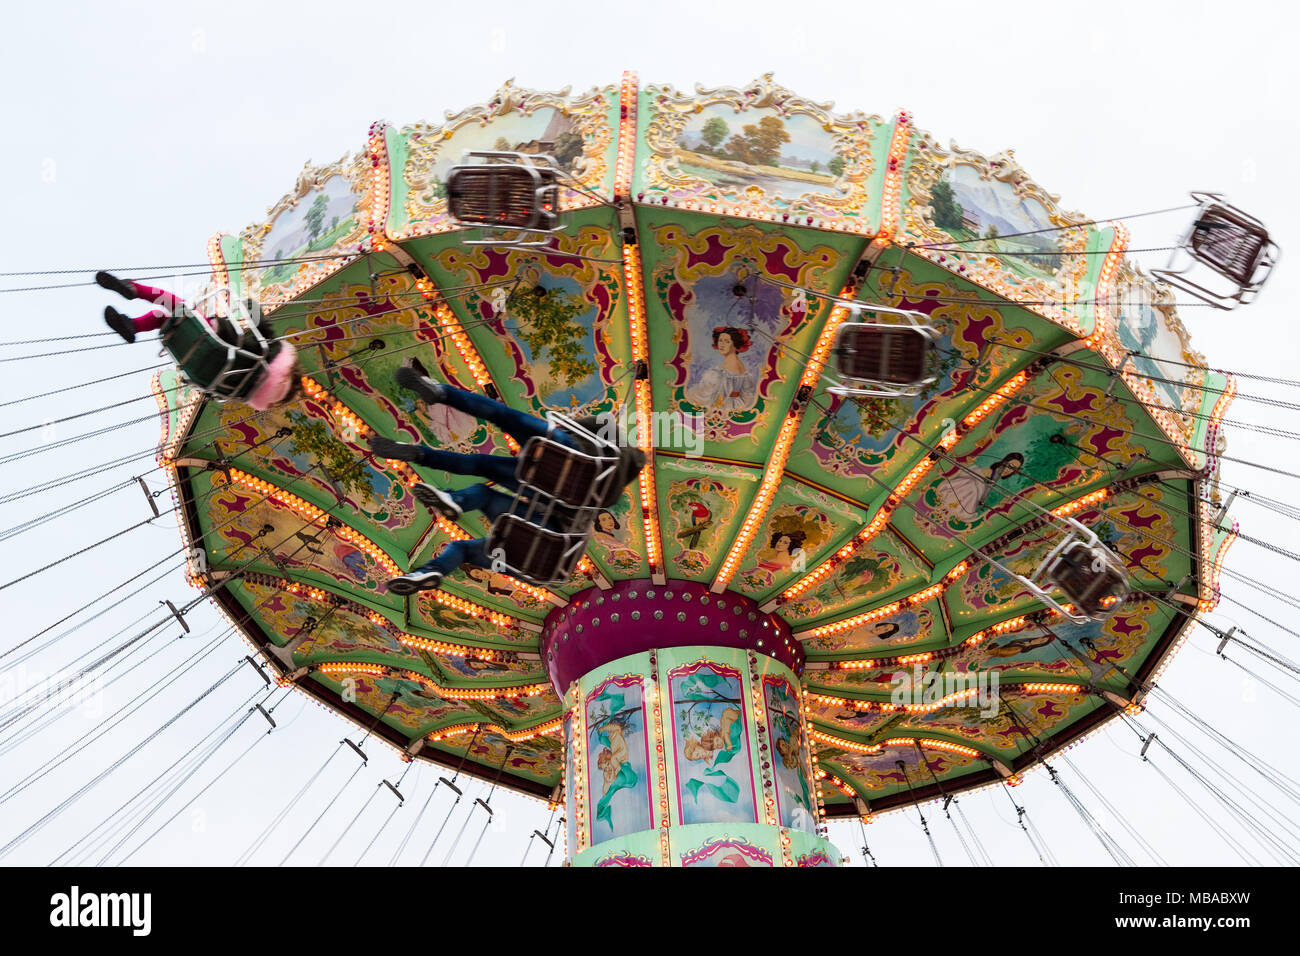 Low angle view of the moving Luftikus carousel or chain swing ride at overcast day, Prater amusement park Stock Photo